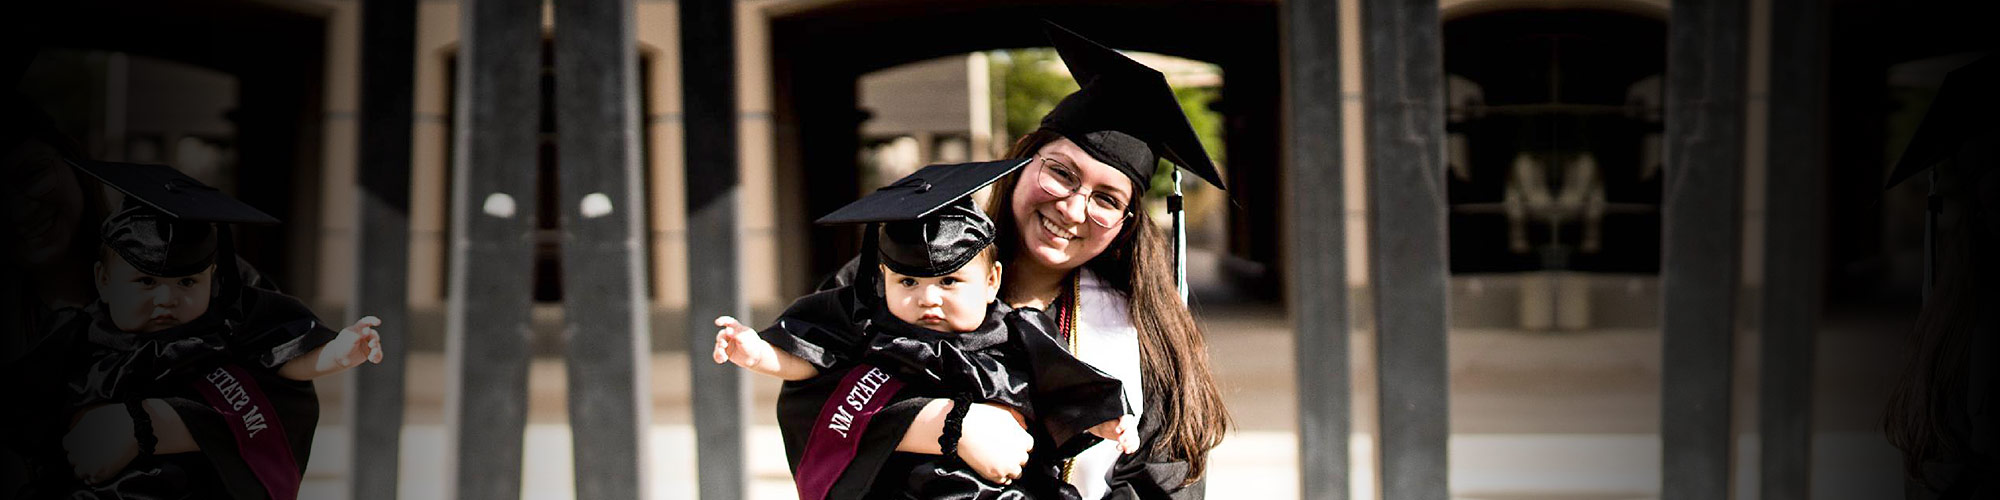 woman in cap and gown with infant on lap